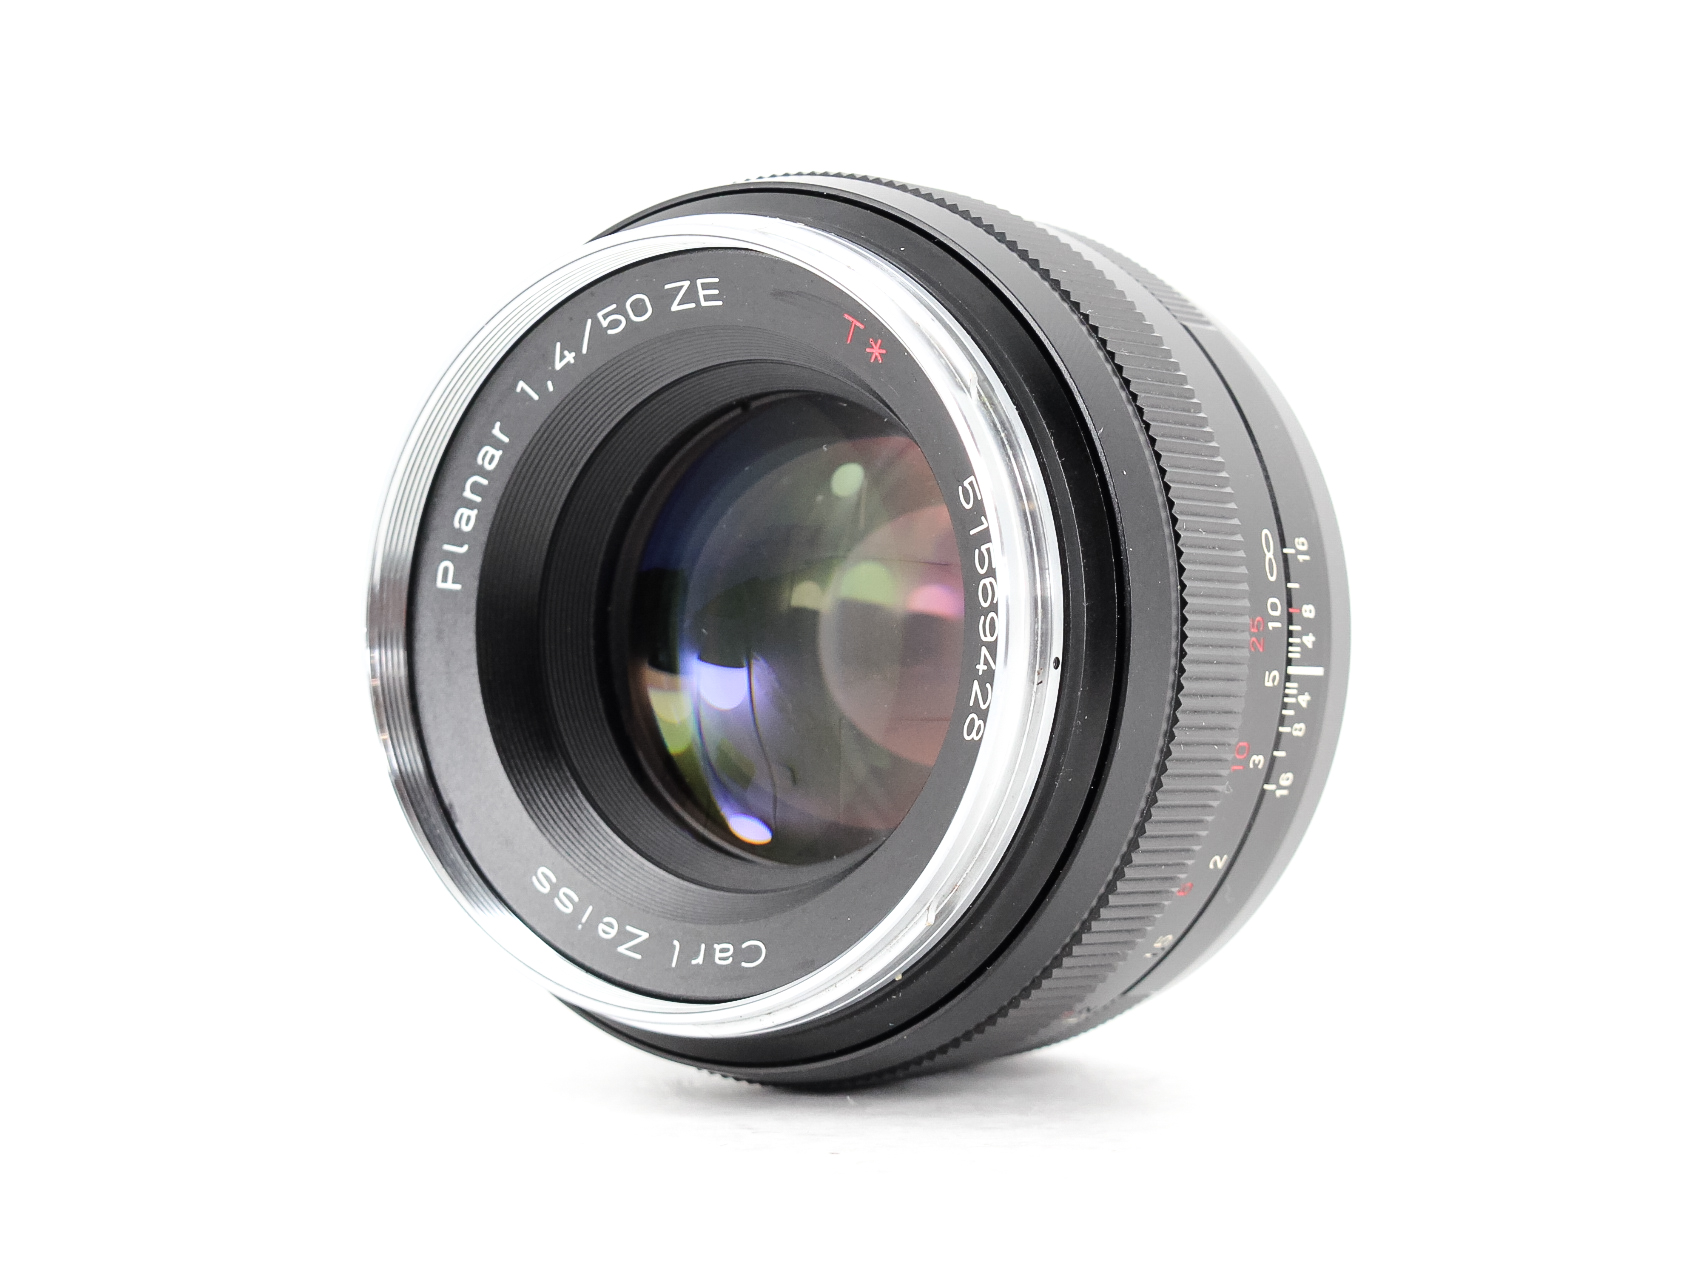 ZEISS Planar T 50mm f1.4 ZE Canon EF Fit Lens - Lenses and Cameras